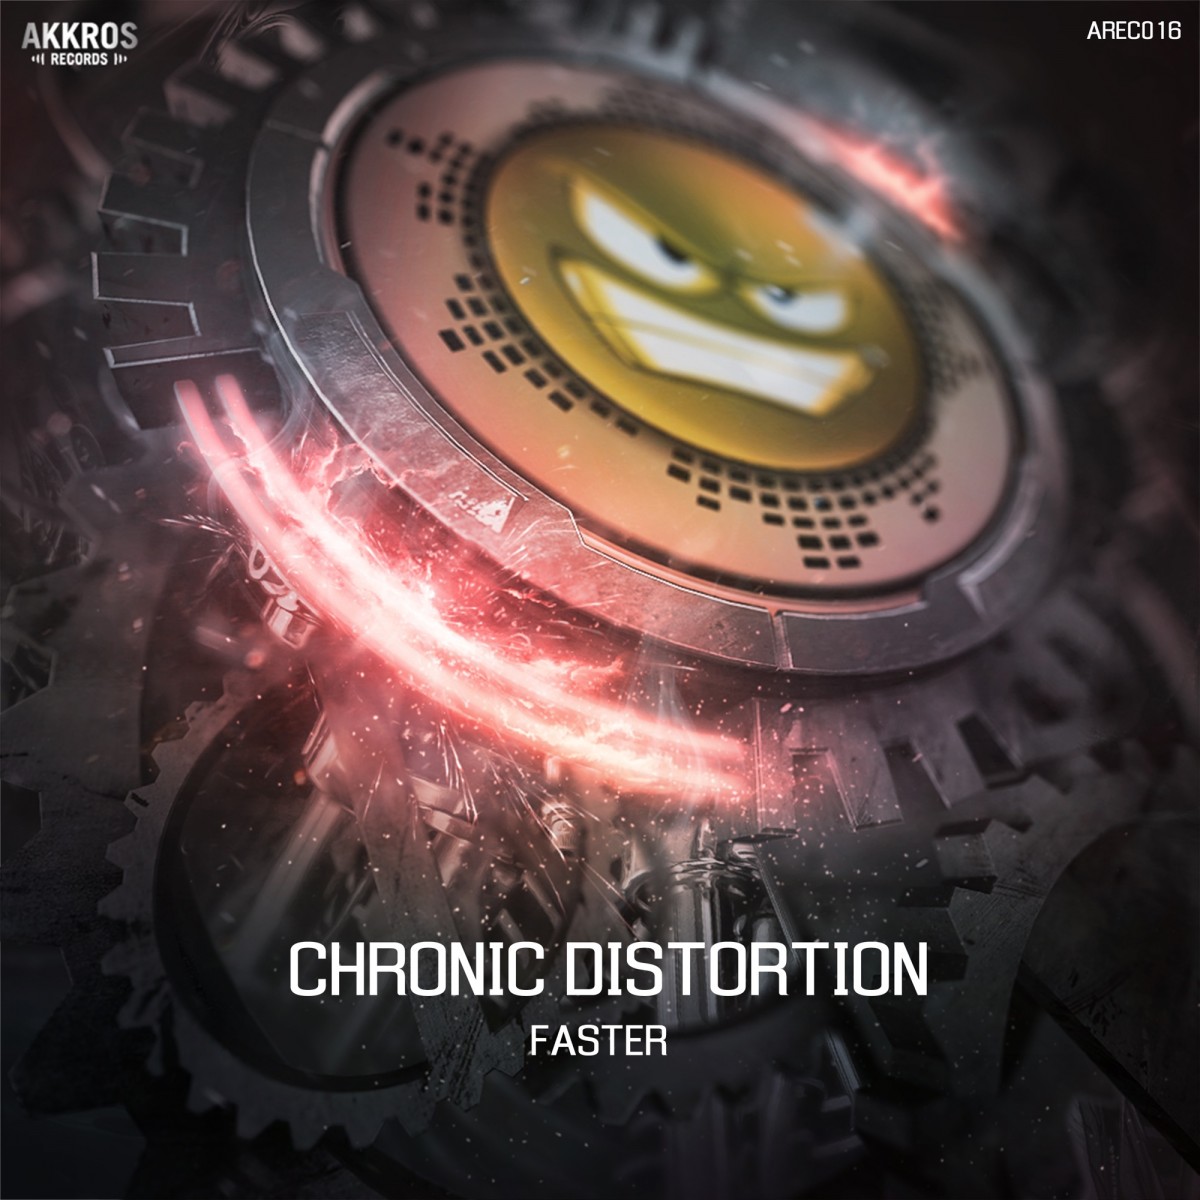 Chronic Distortion - Faster